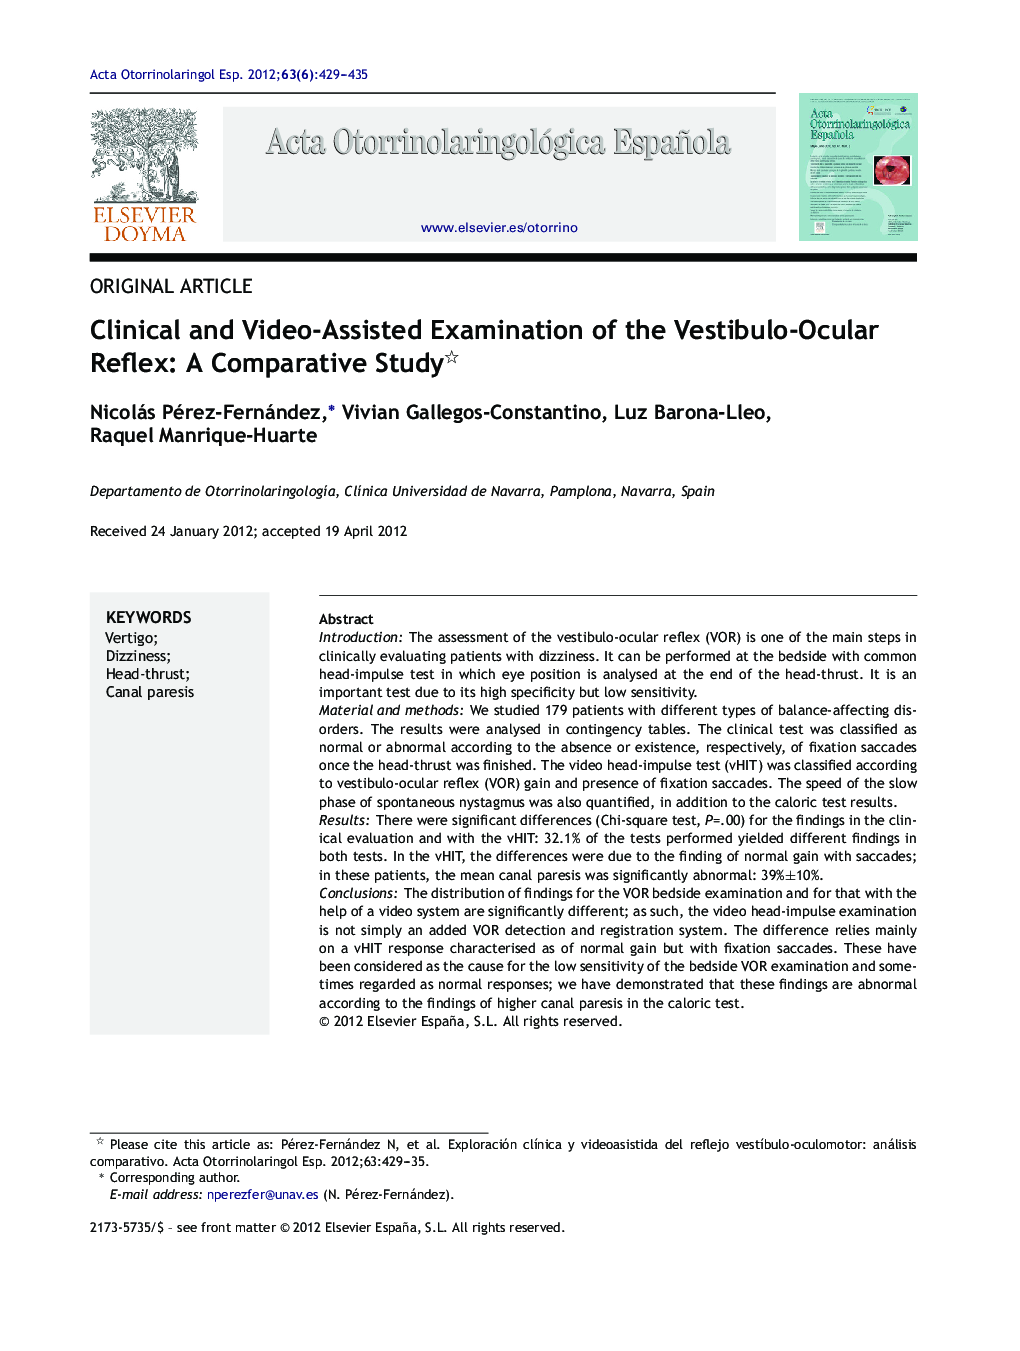 Clinical and Video-Assisted Examination of the Vestibulo-Ocular Reflex: A Comparative Study 